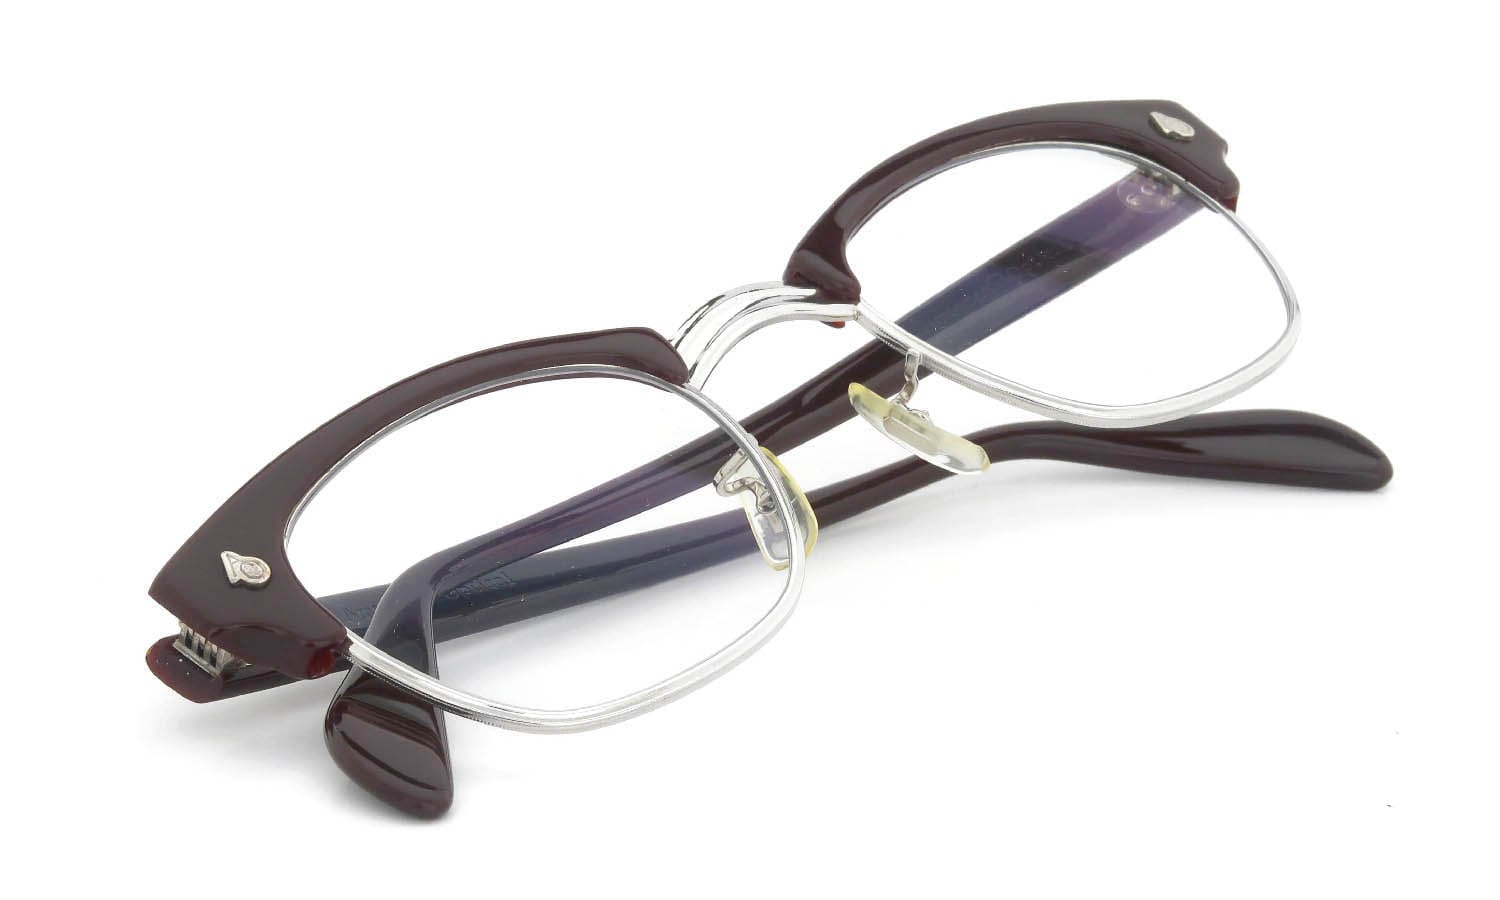 American Optical Vintage 1960s-1980s Brow Combination AO鋲 Brown/Silver 48-24